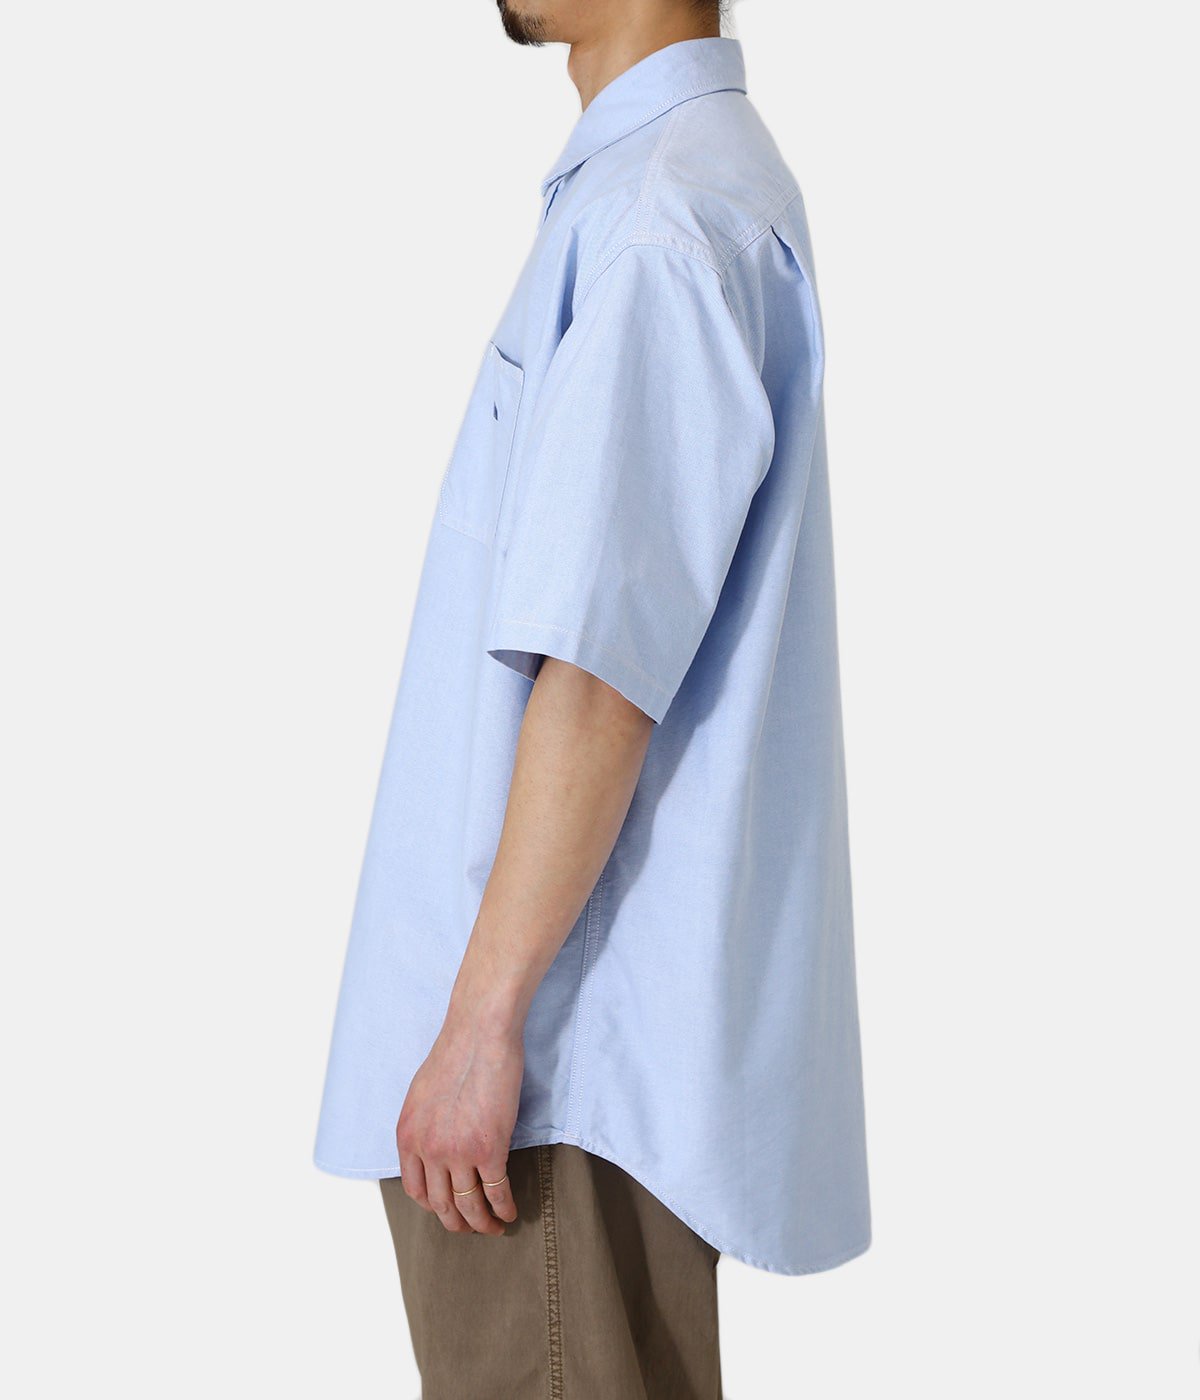 Cotton Polyester OX H/S Shirt